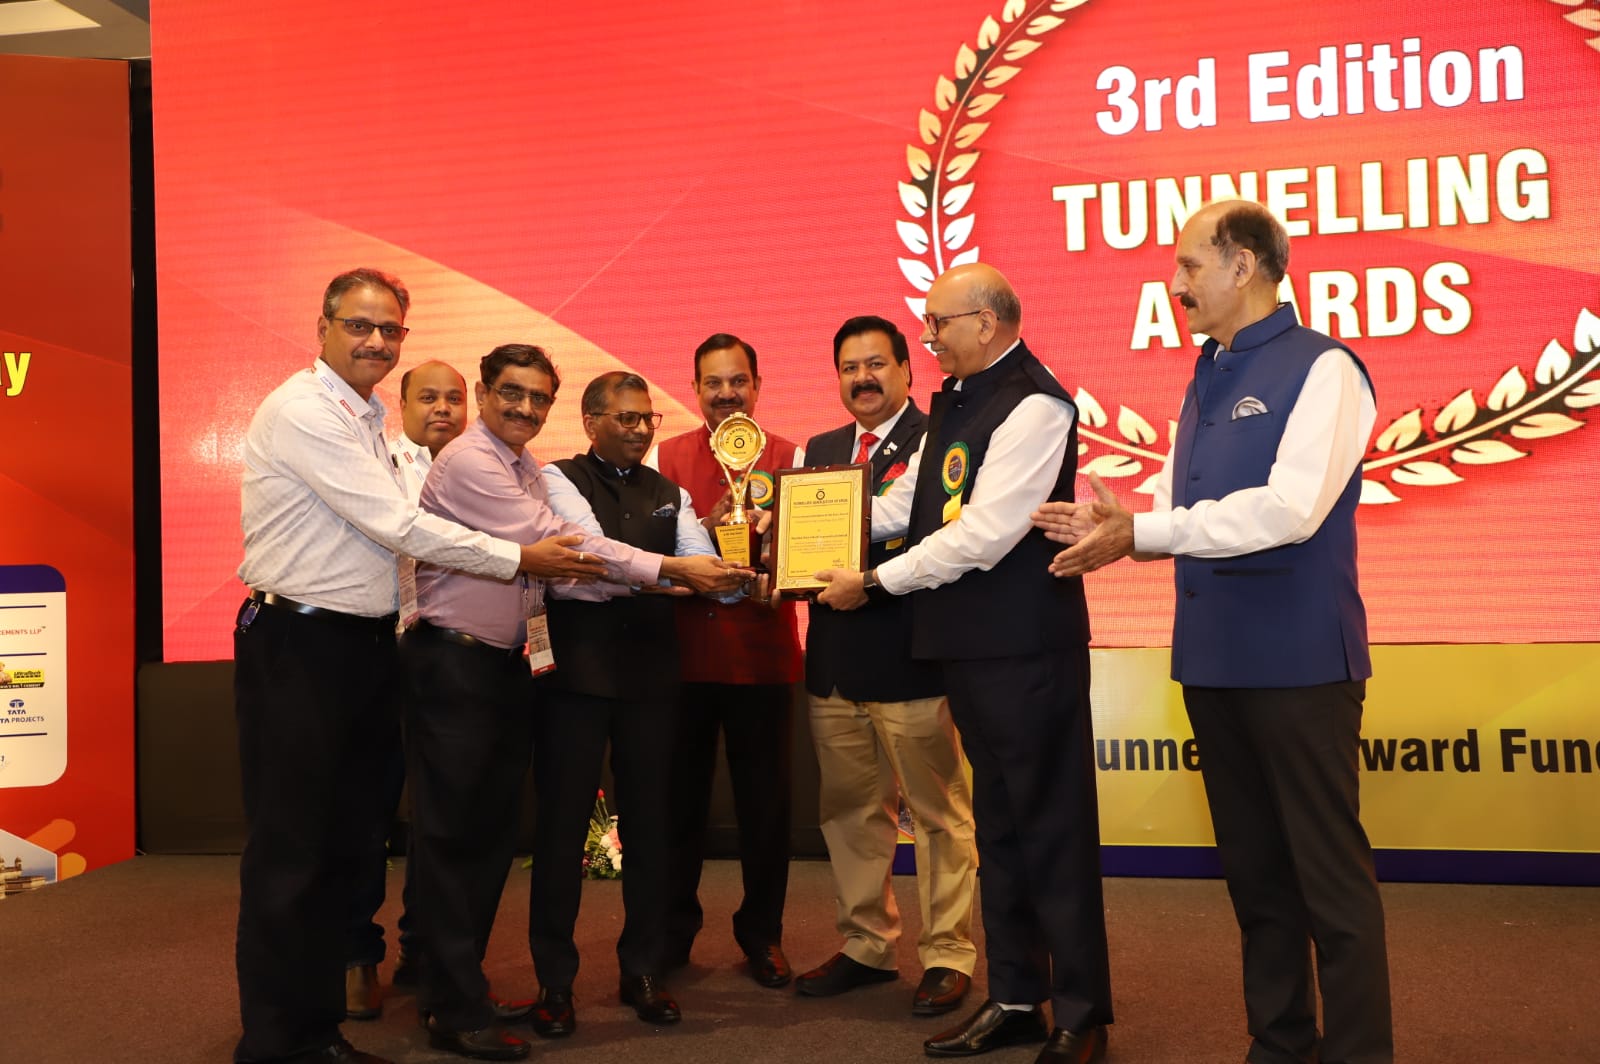 MMRC receives Environmental Initiative of the year Award for TAI Tunnelling & Underground Space Awards 2022.